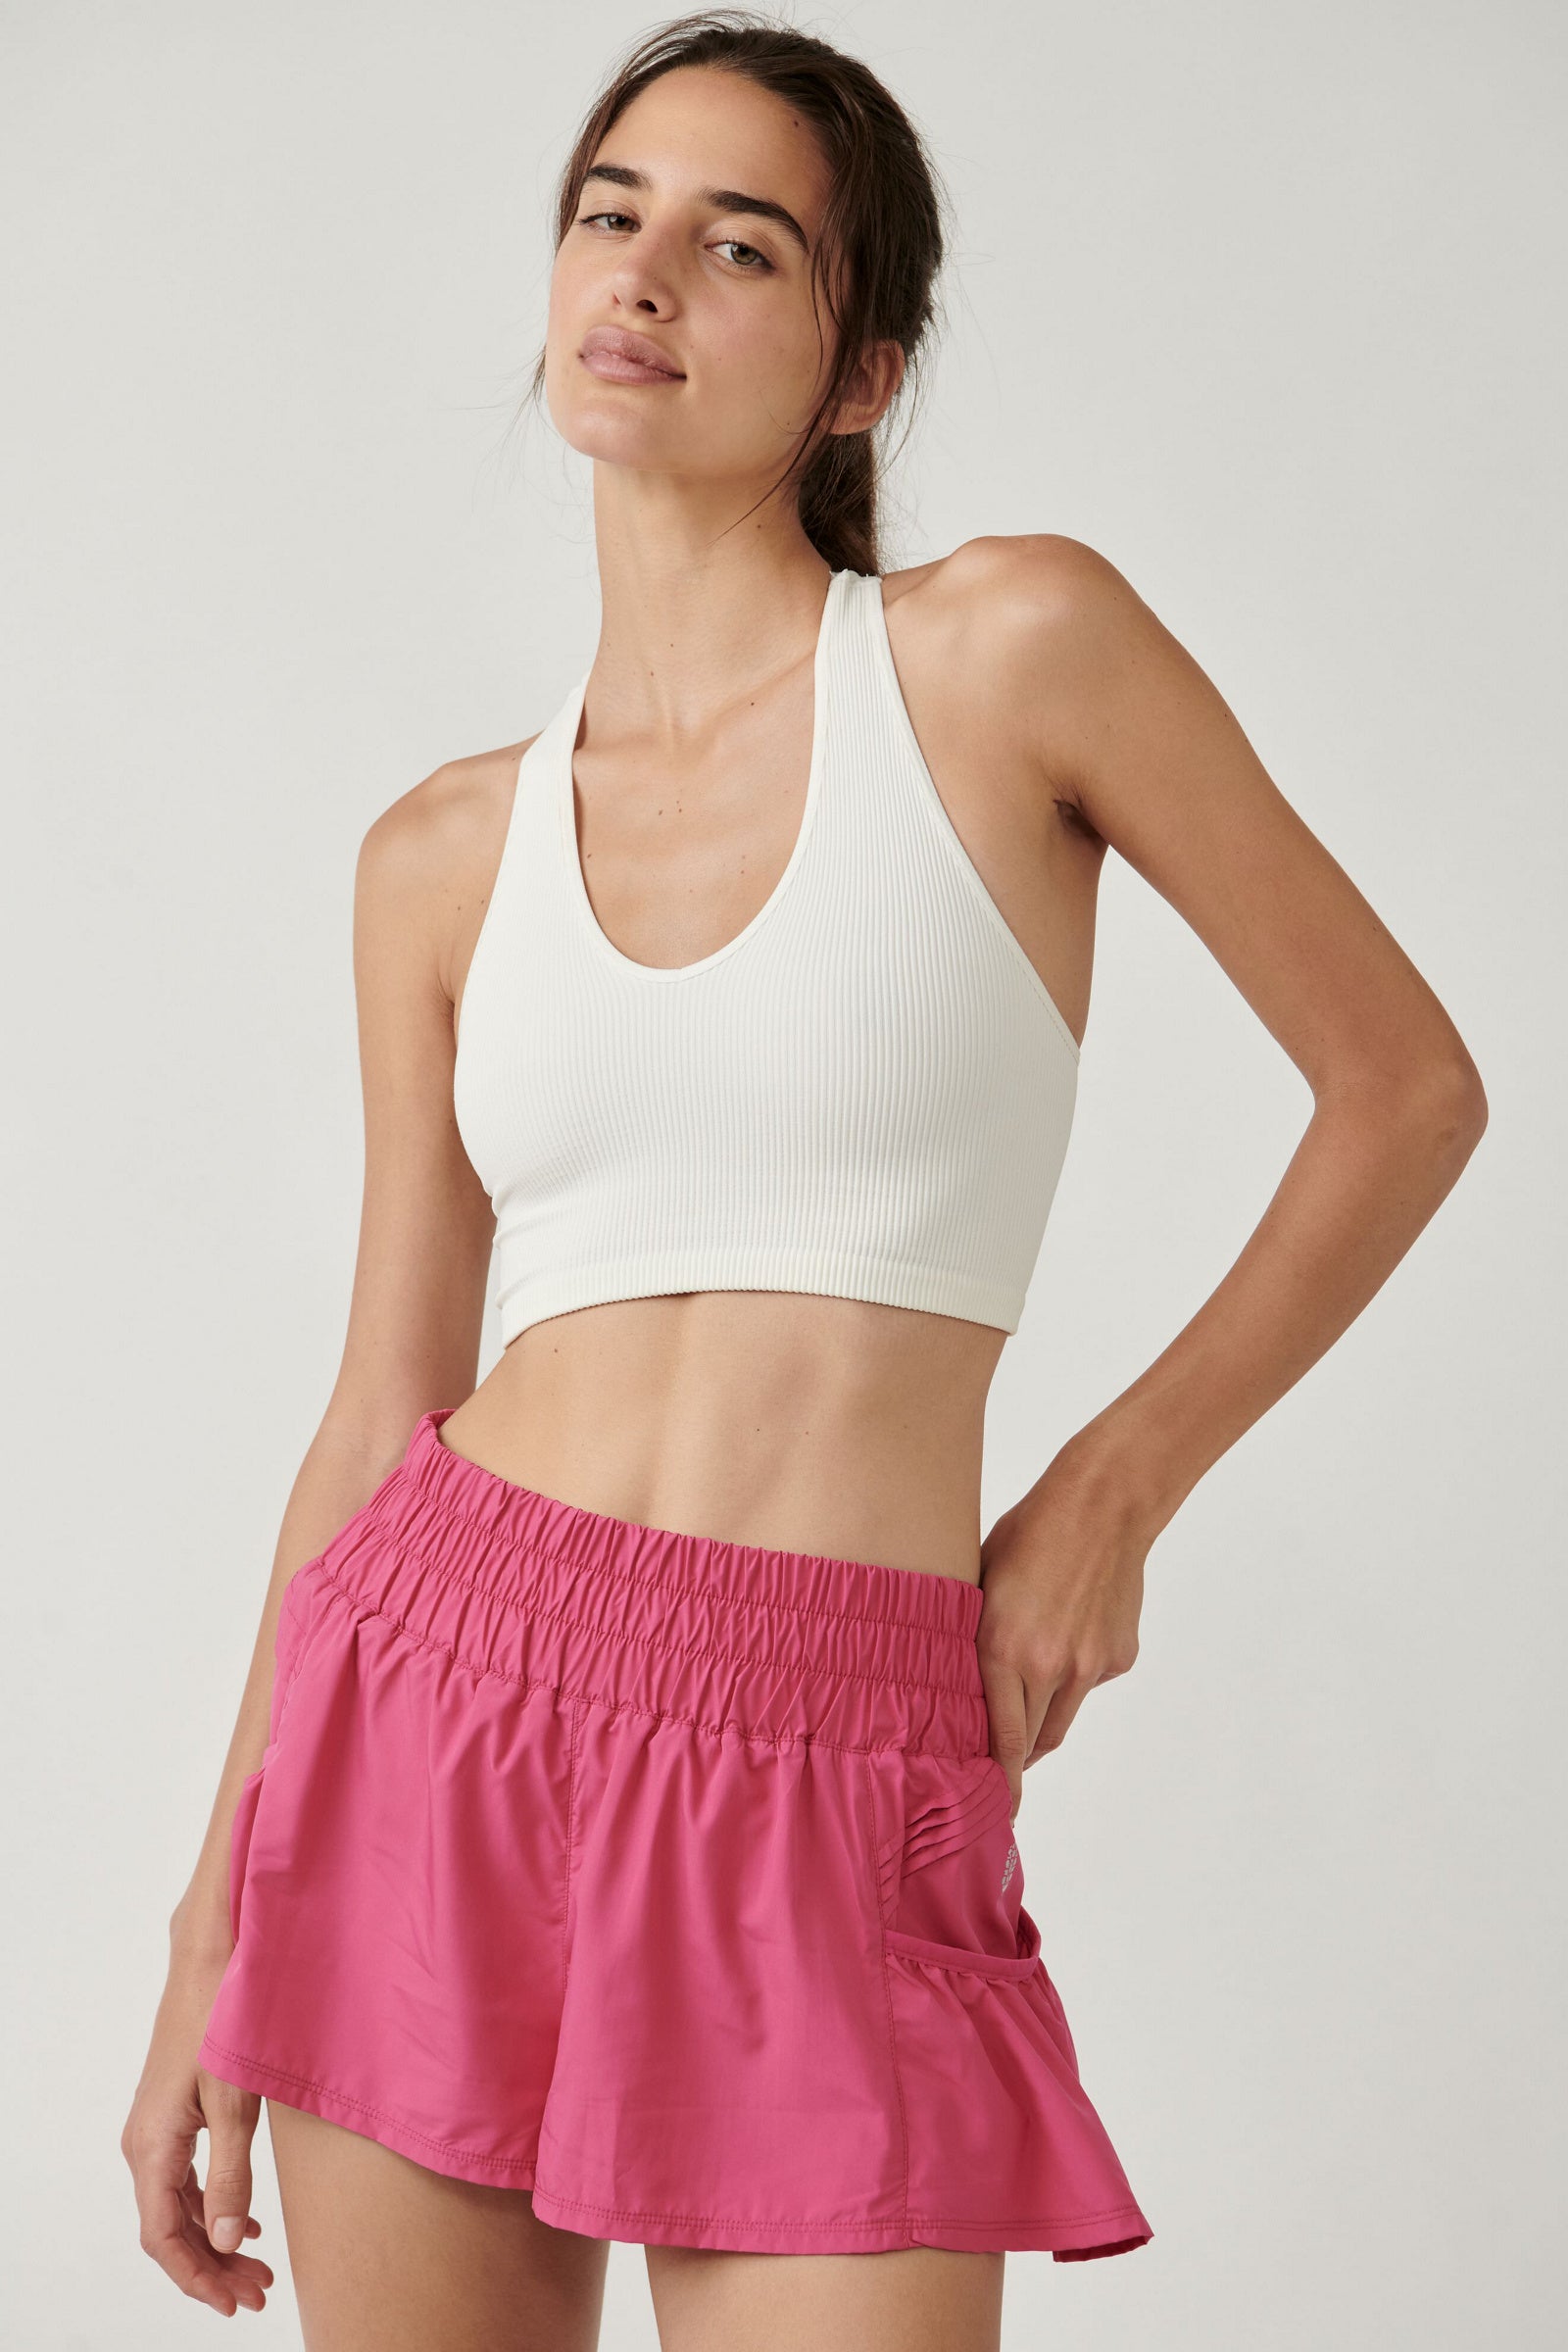 FREE PEOPLE GET YOUR FLIRT ON SHORT IN PUNCH CRUSH